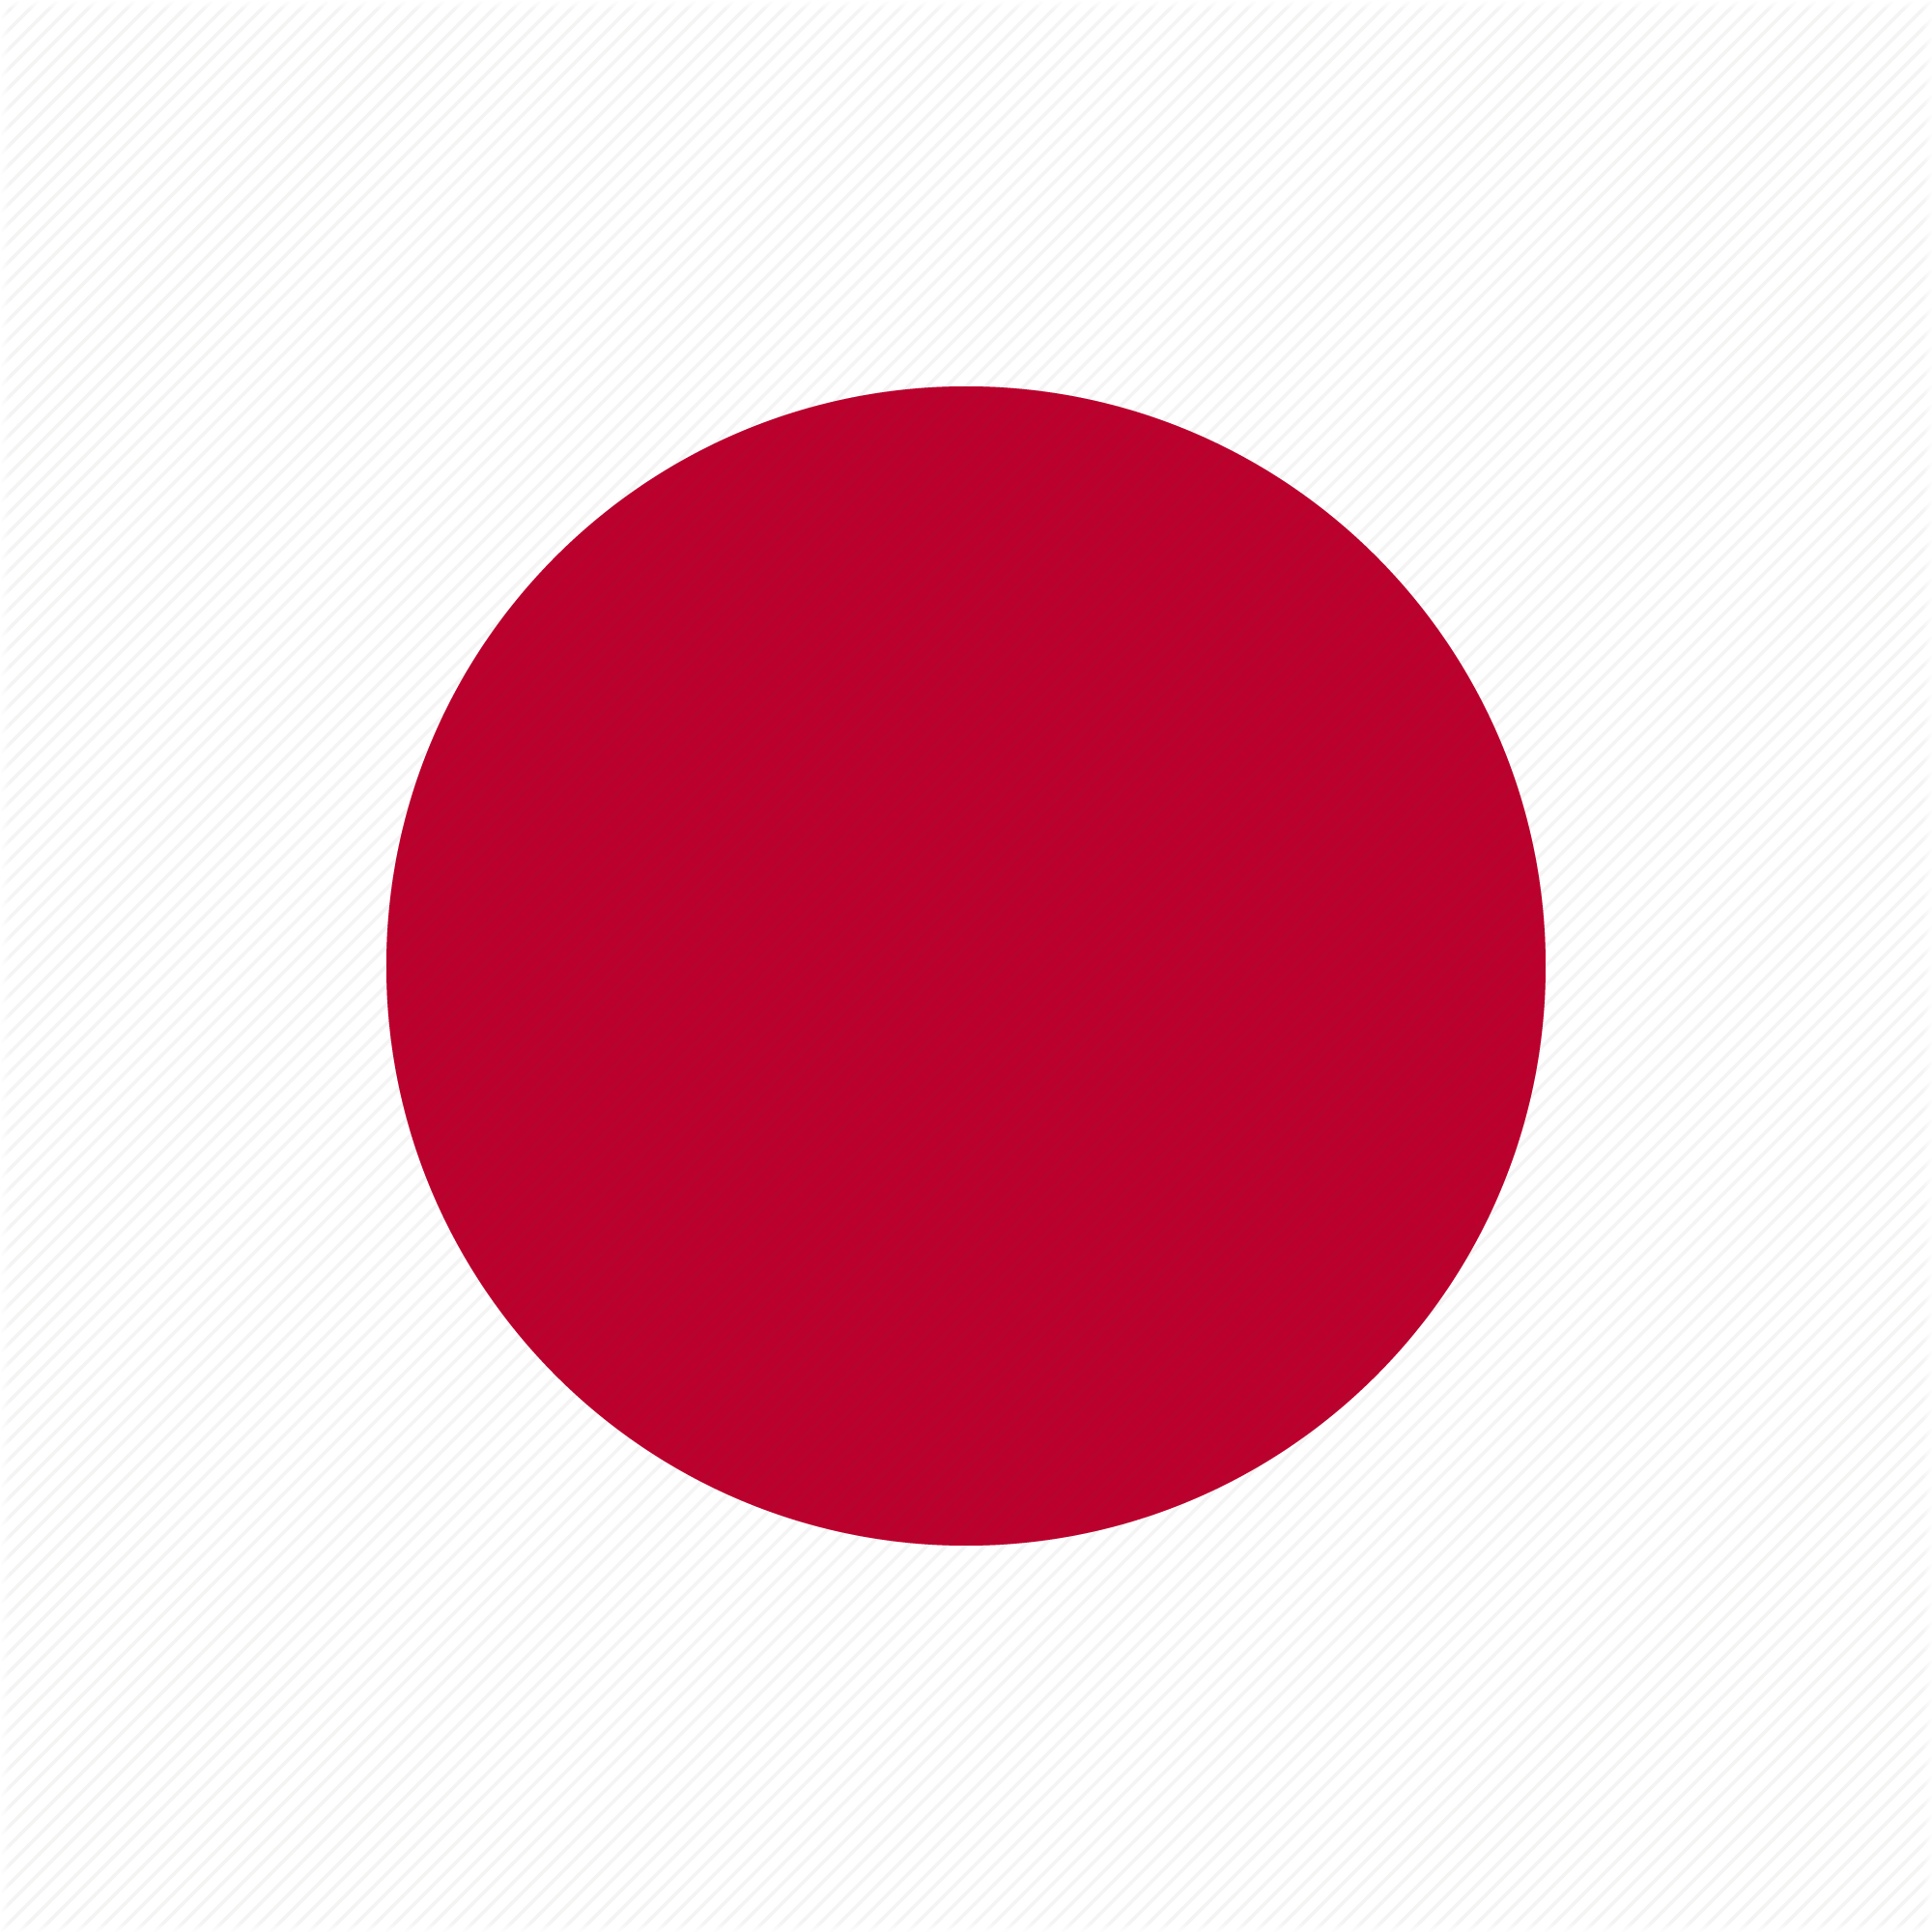 Red,Circle,Material property,Logo,Oval